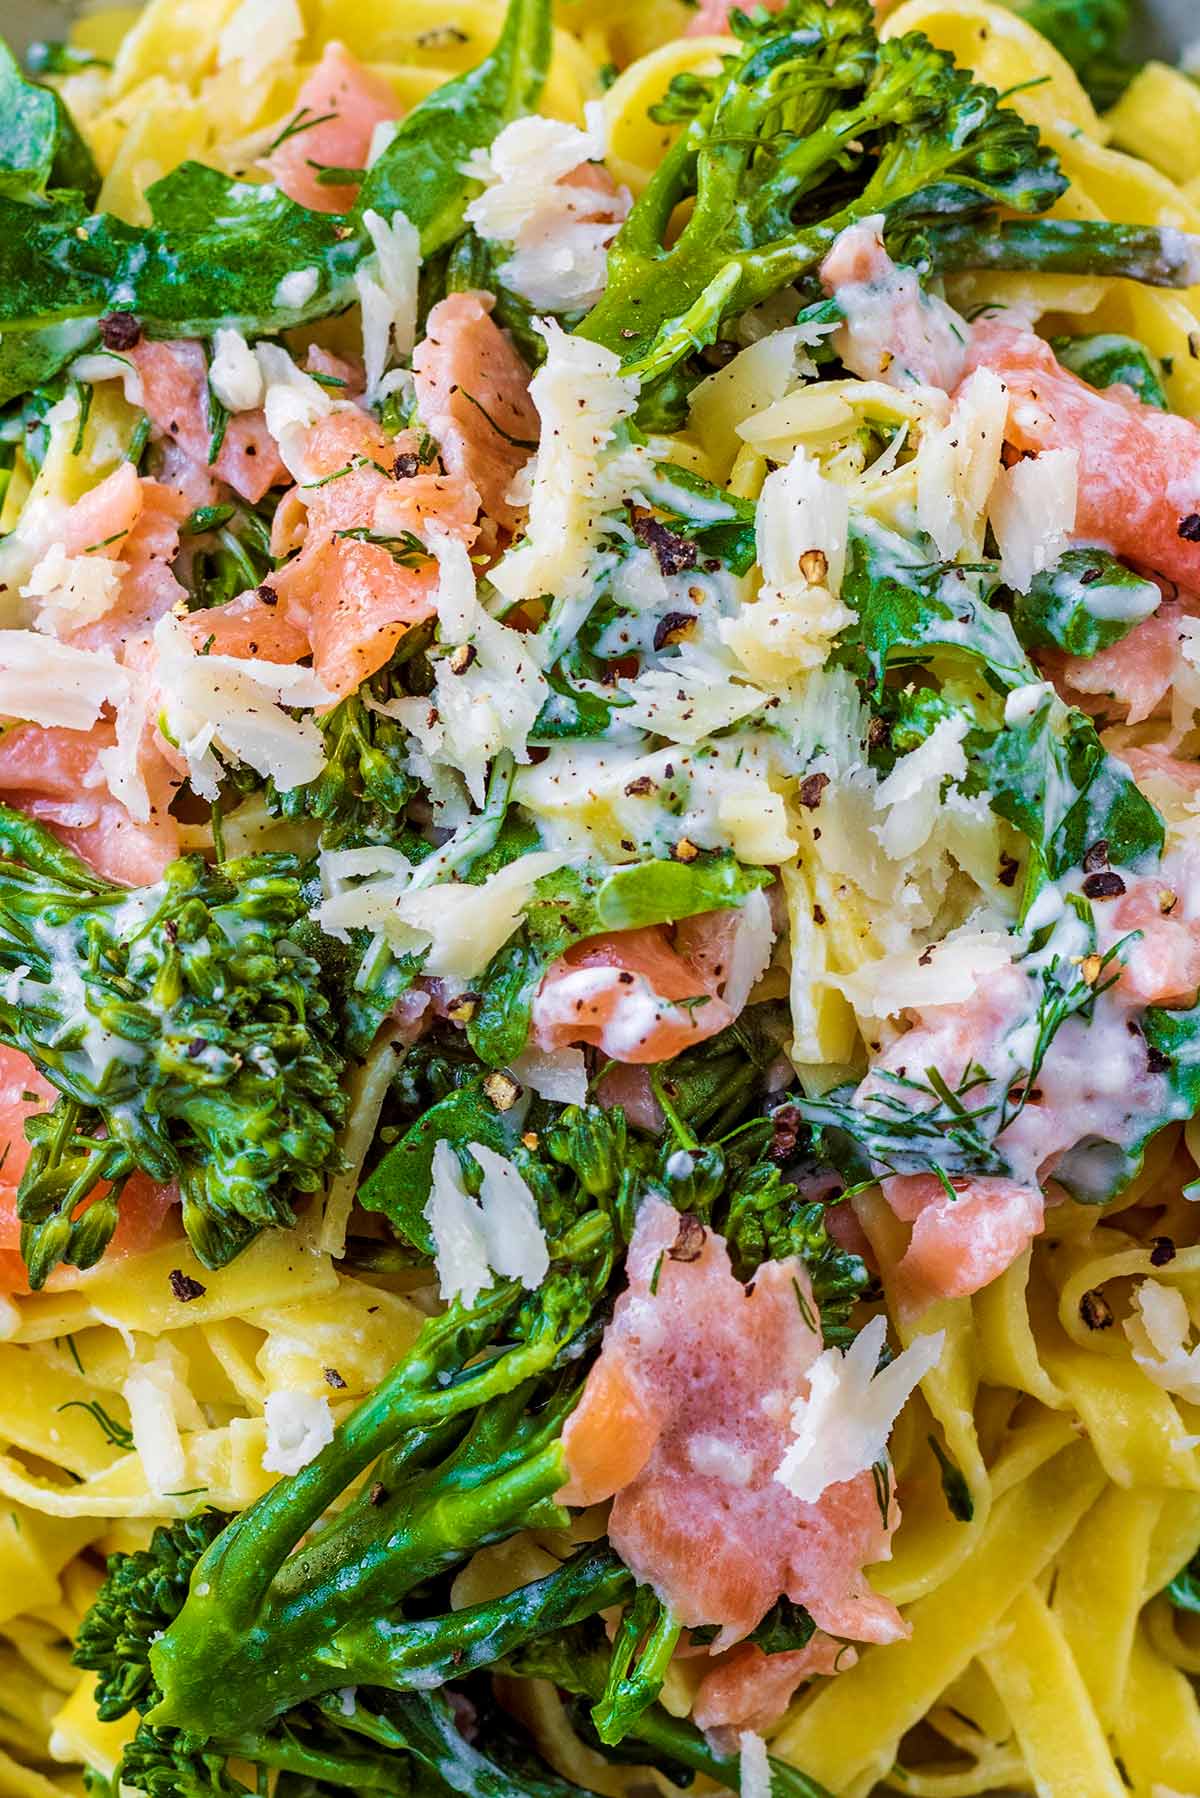 Cooked tagliatelle mixed with salmon, broccoli, cheese and dill.